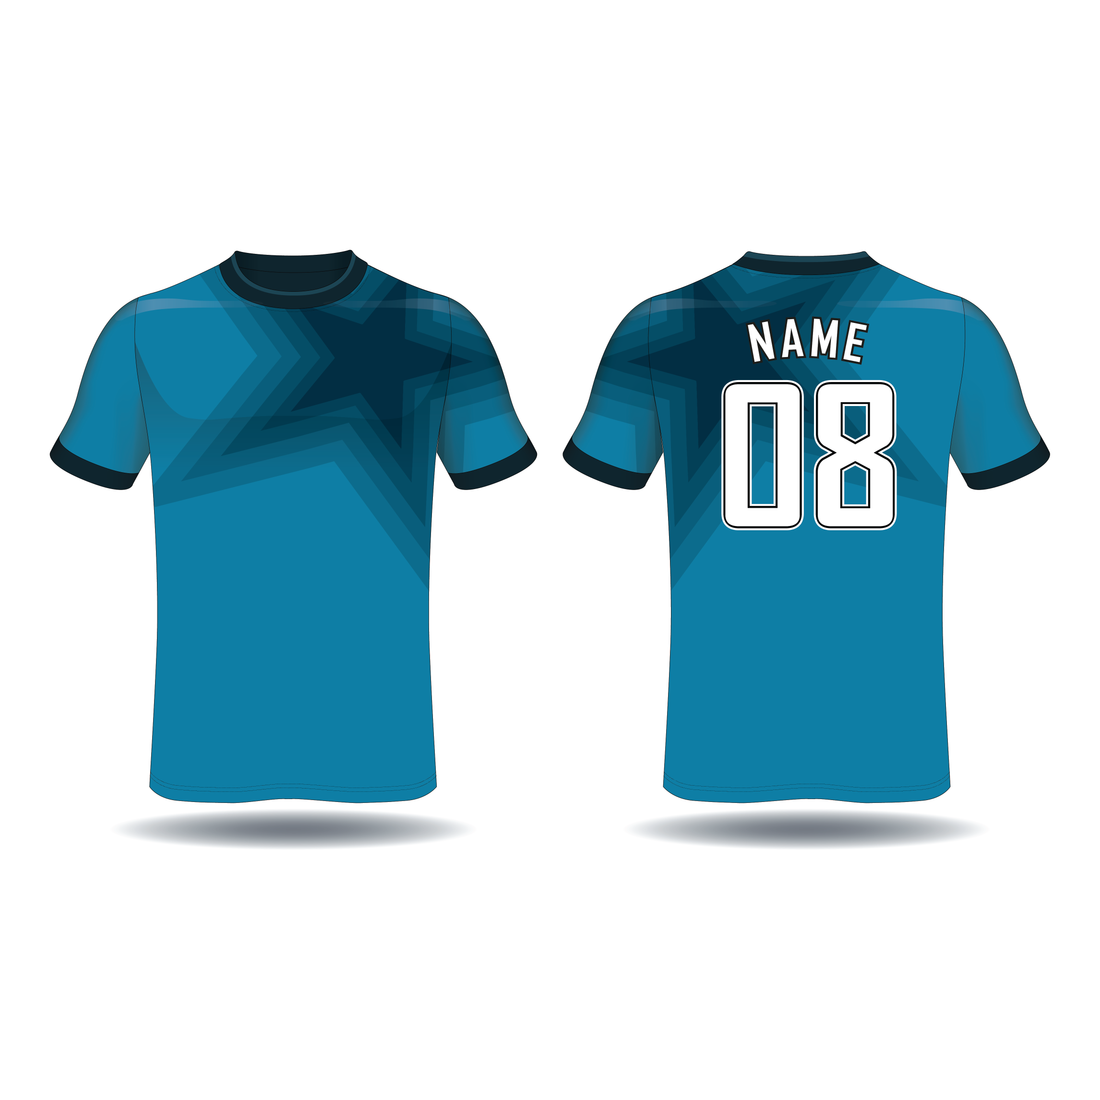 NEXT PRINT All Over Printed Customized Sublimation T-Shirt Unisex Sports Jersey Player Name & Number, Team Name NP50000284